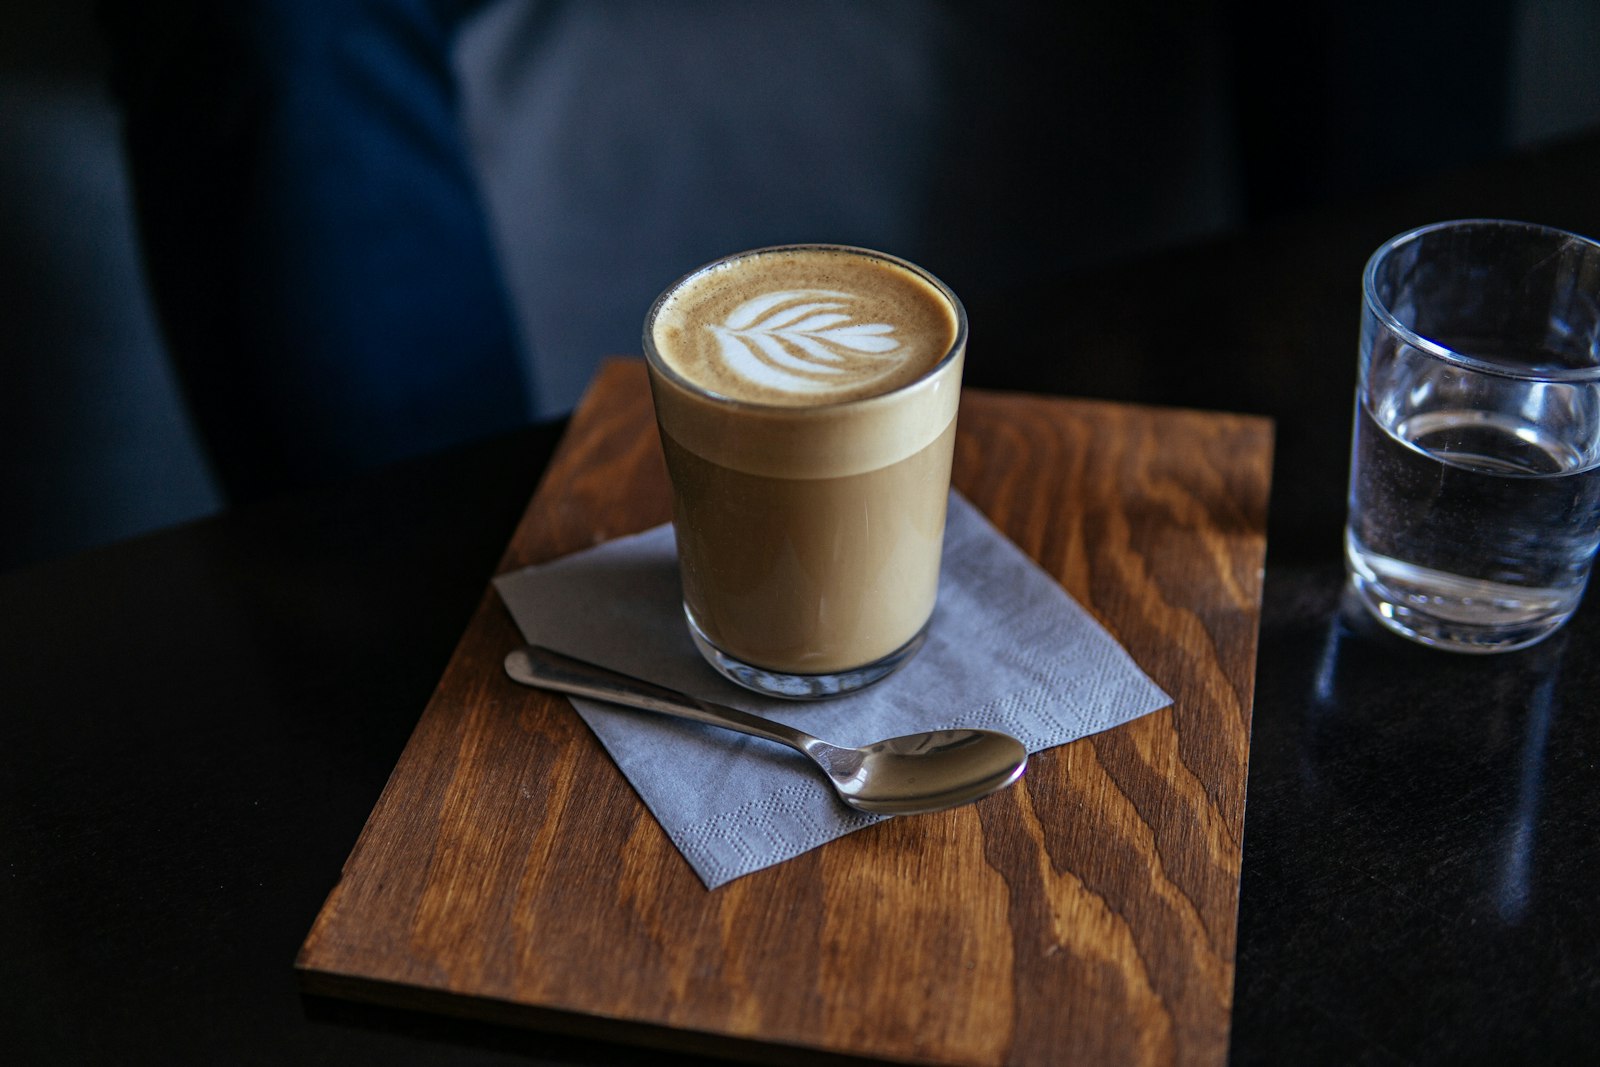 Sony a6000 sample photo. Cappuccino in drinking glass photography